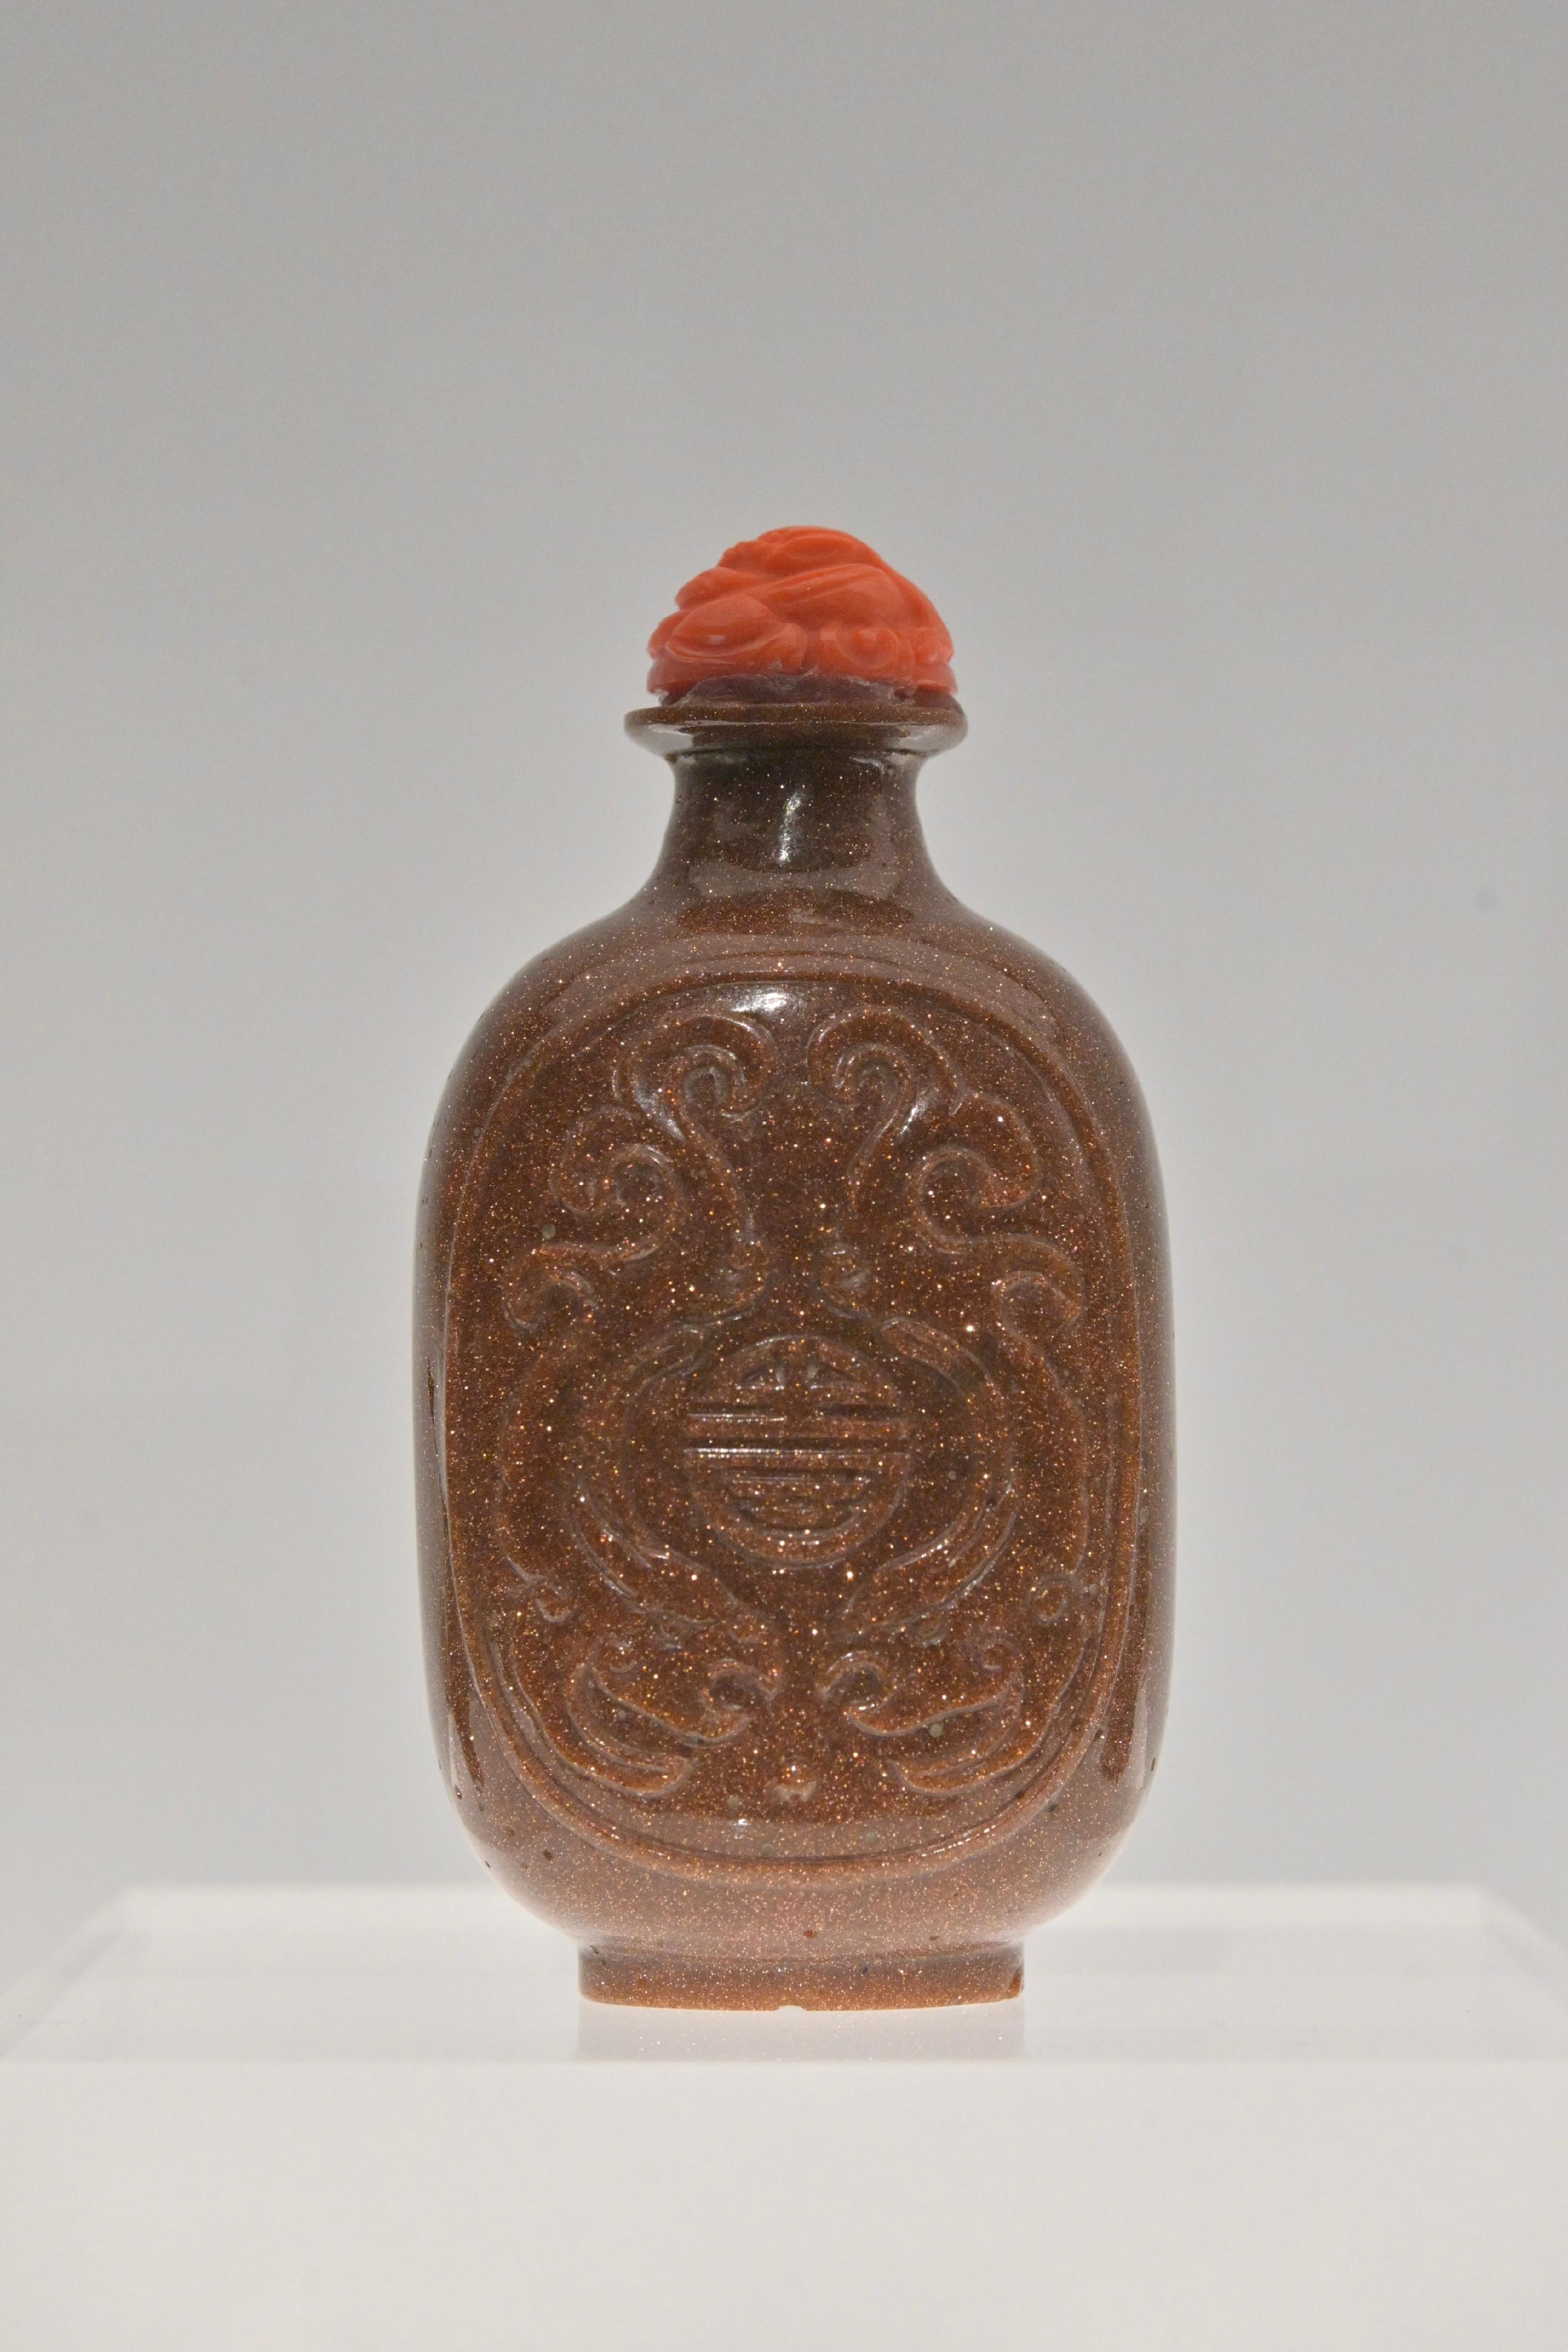 The opening ceremony of the "Art of Gifting: The Fuyun Xuan Collection of Chinese Snuff Bottles" exhibition and donation ceremony was held today (April 11) at the Hong Kong Museum of Art. Photo shows an aventurine glass snuff bottle with chi-dragons and shou medallion design.